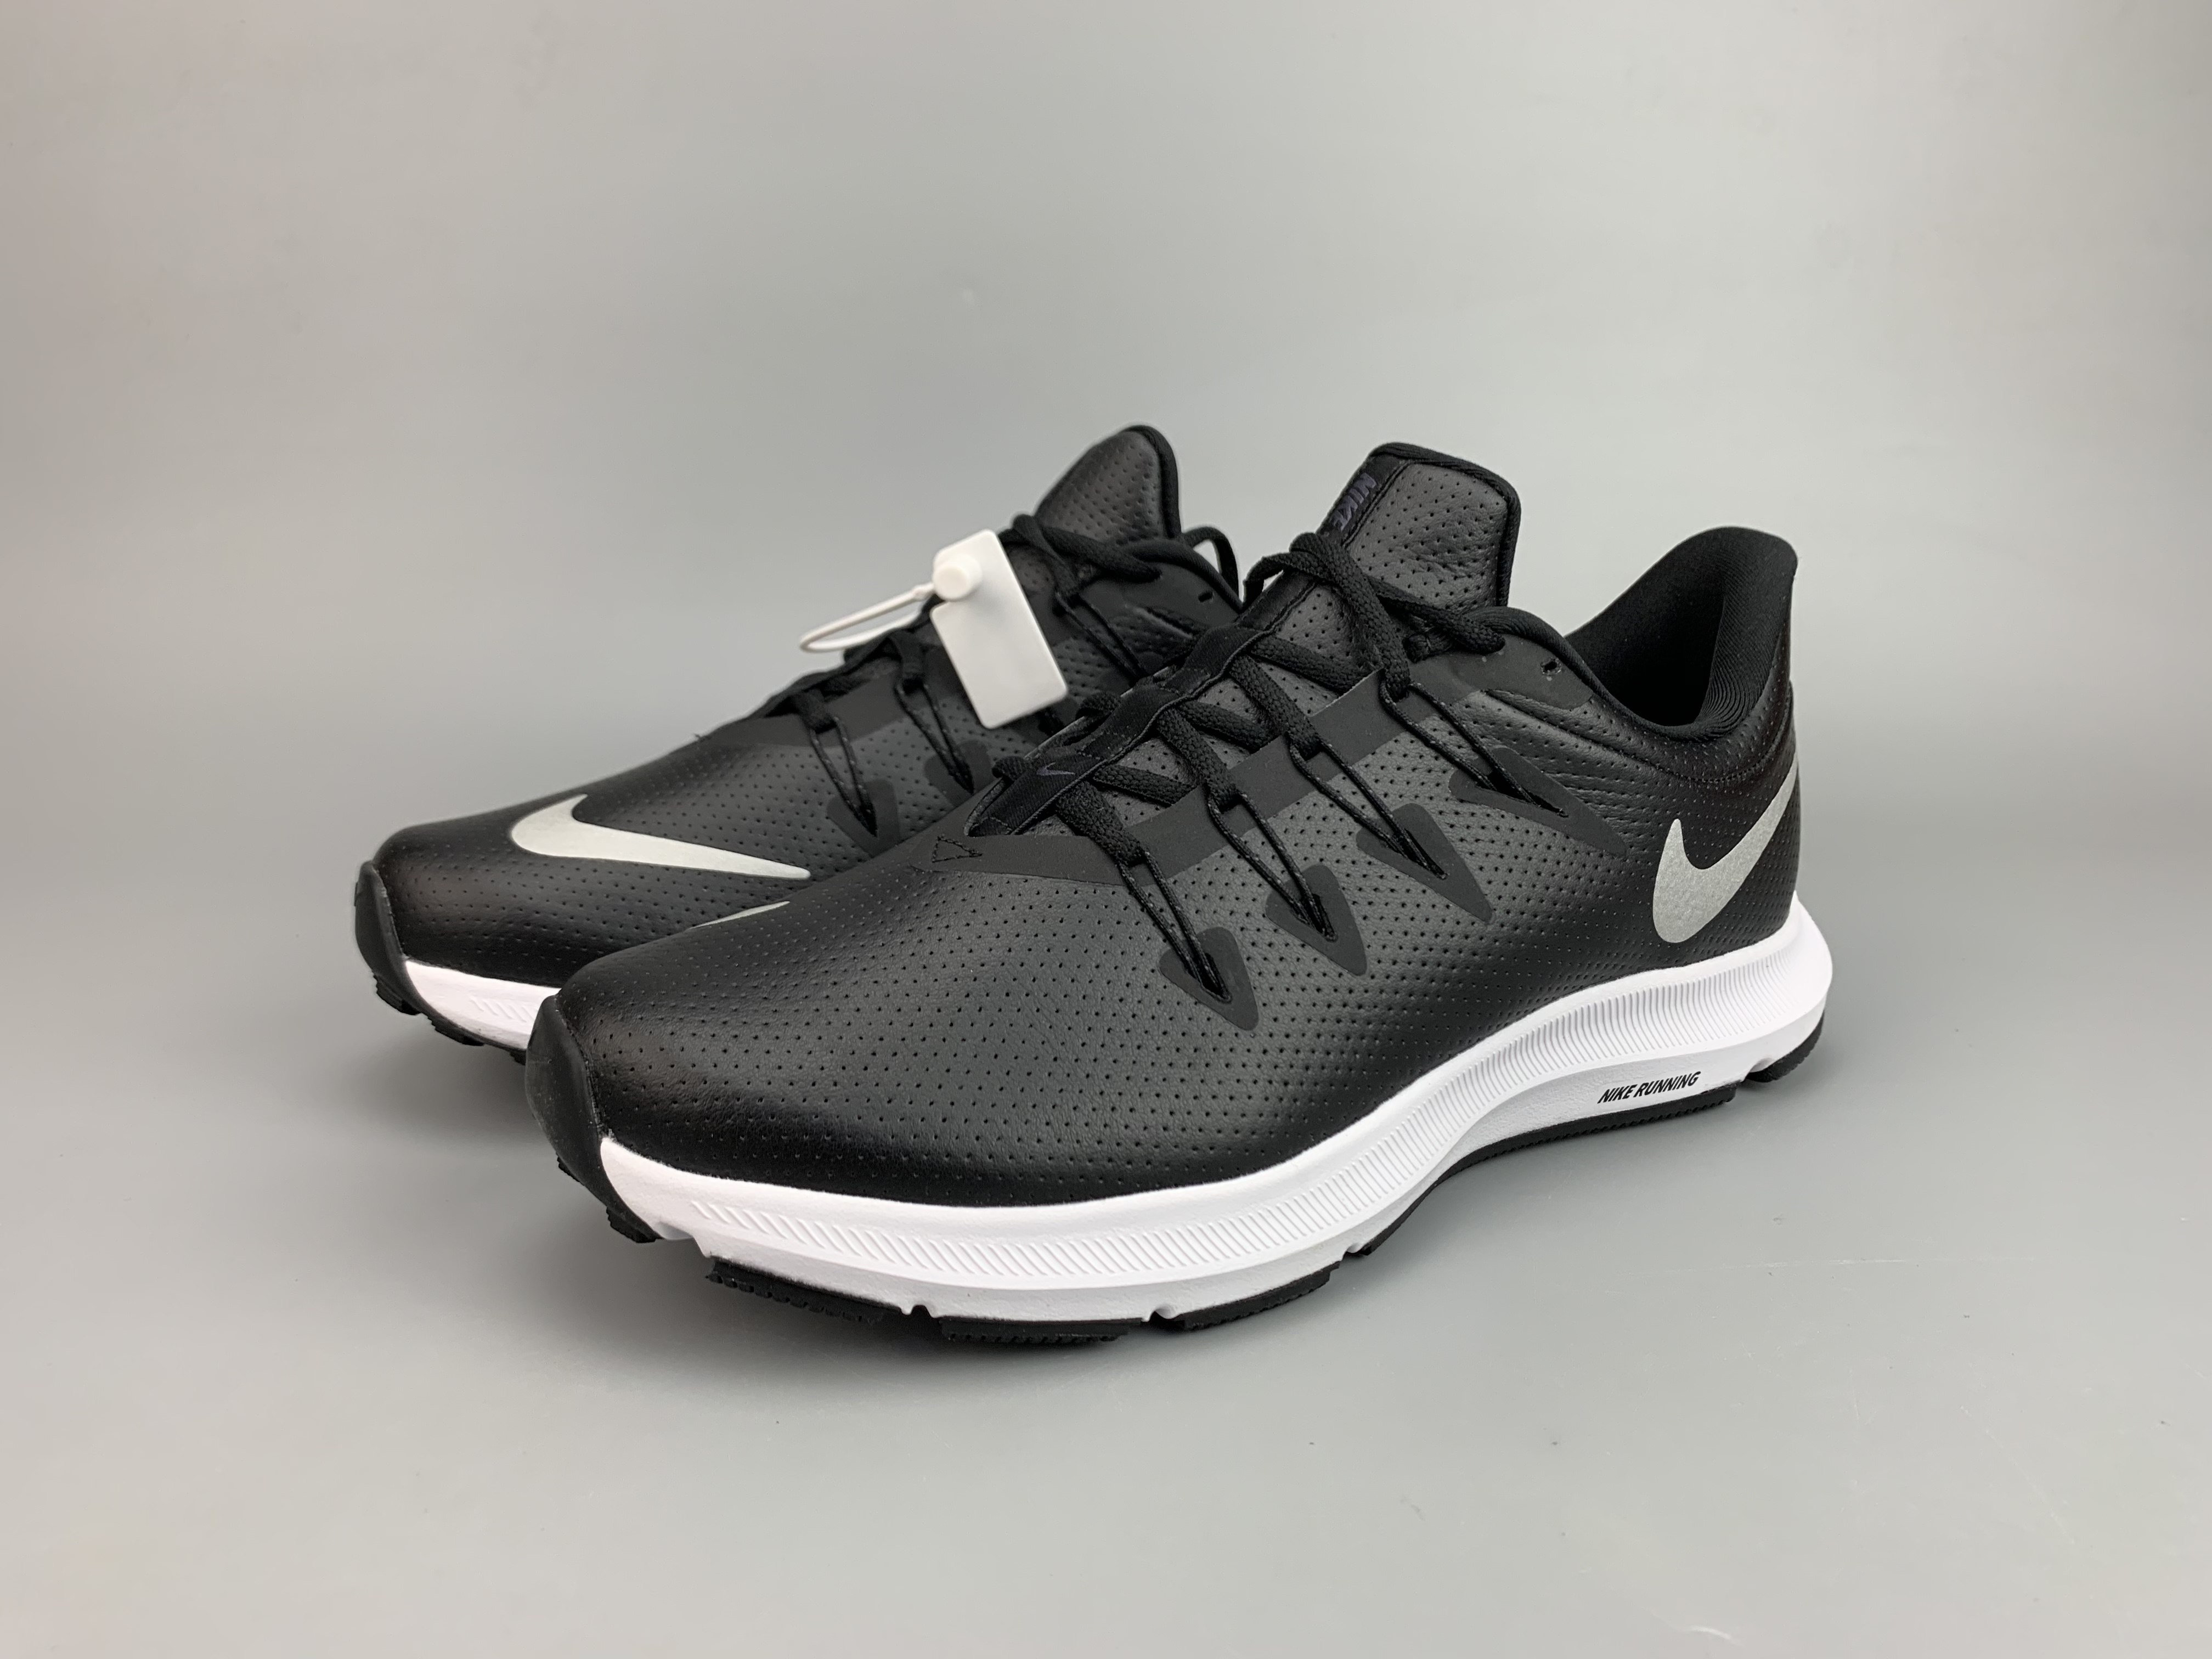 Nike Quest II Leather Black White Running Shoes